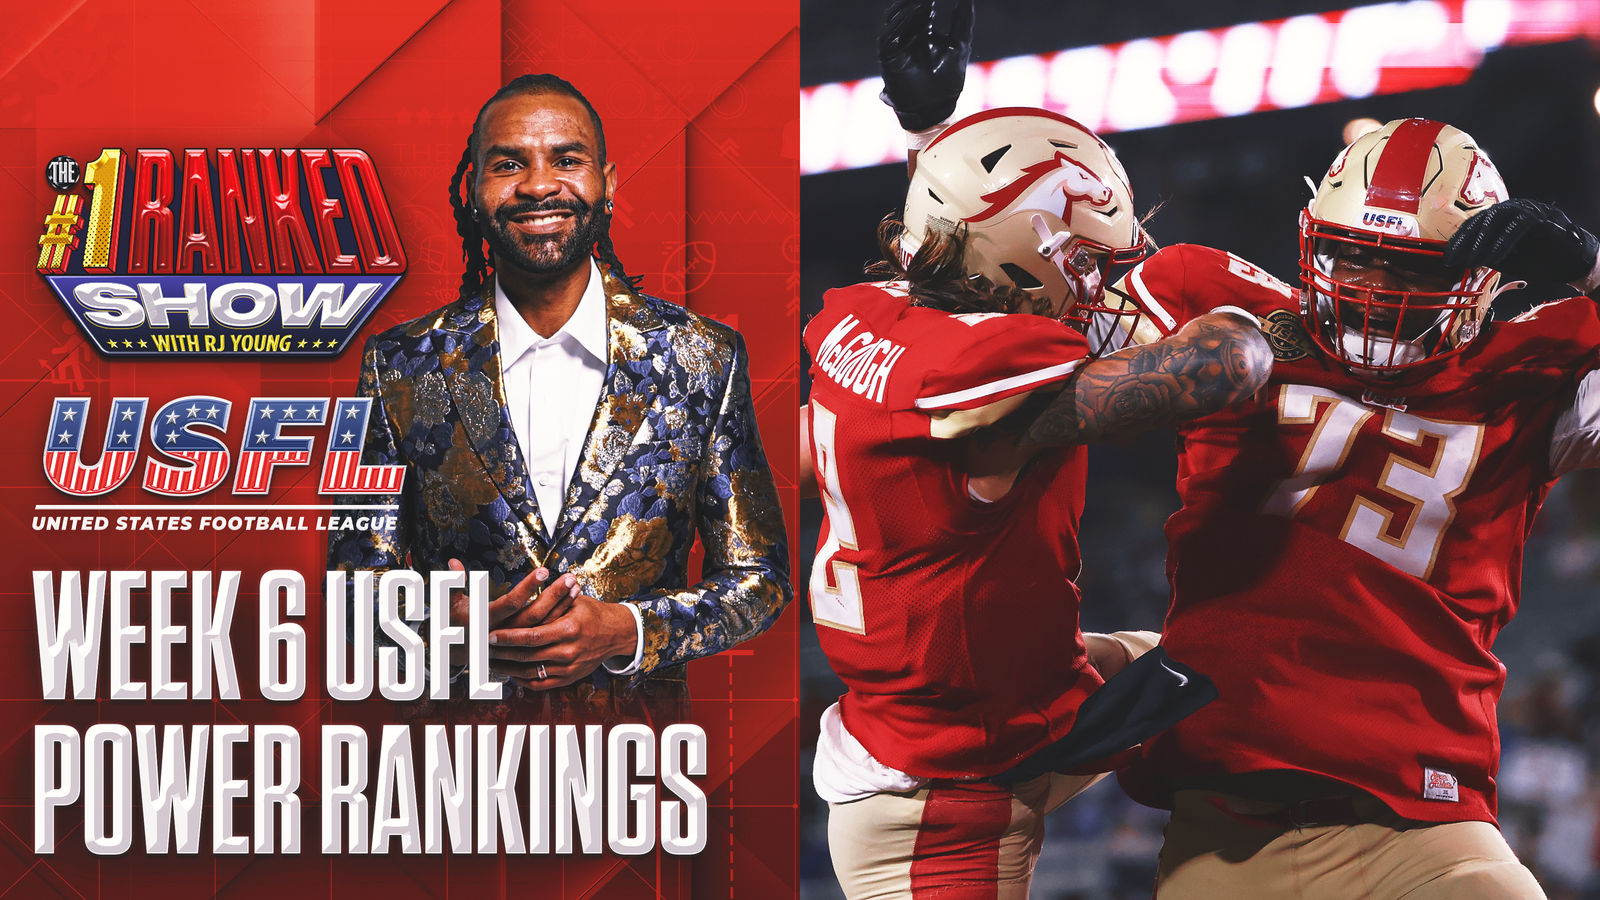 RJ Young's USFL Power Rankings after Week 6